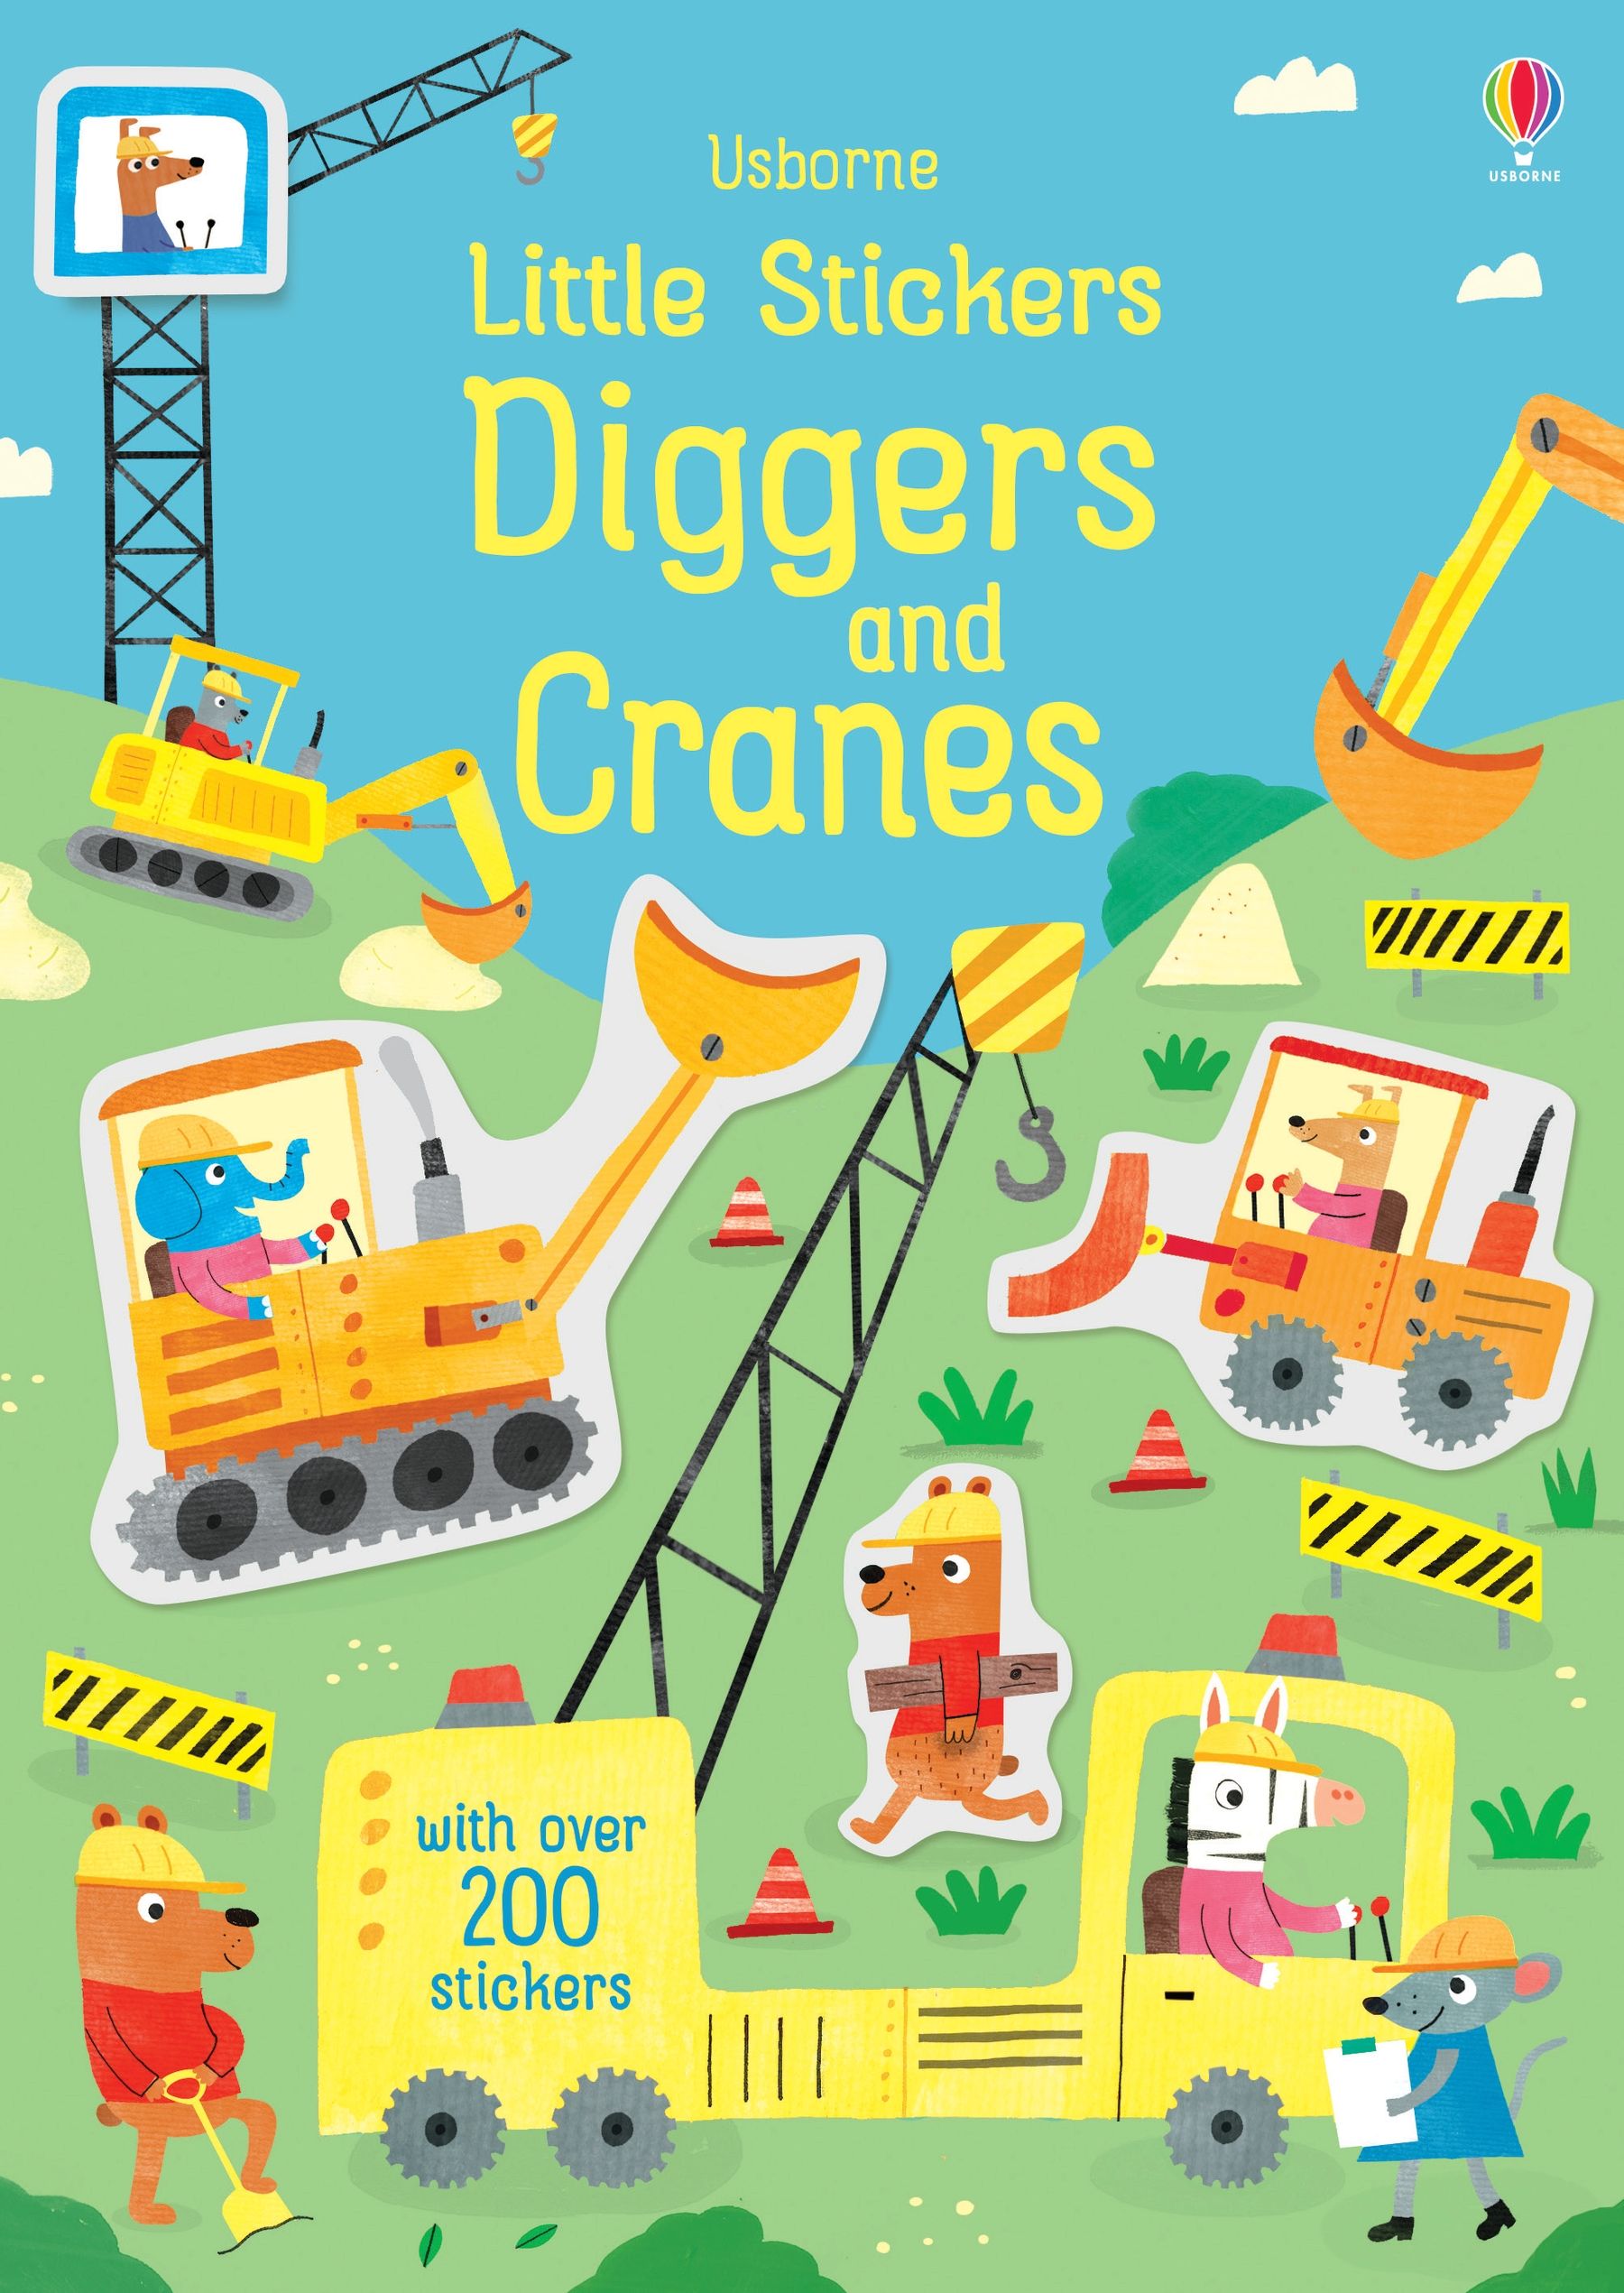 Little Stickers Diggers and Cranes    